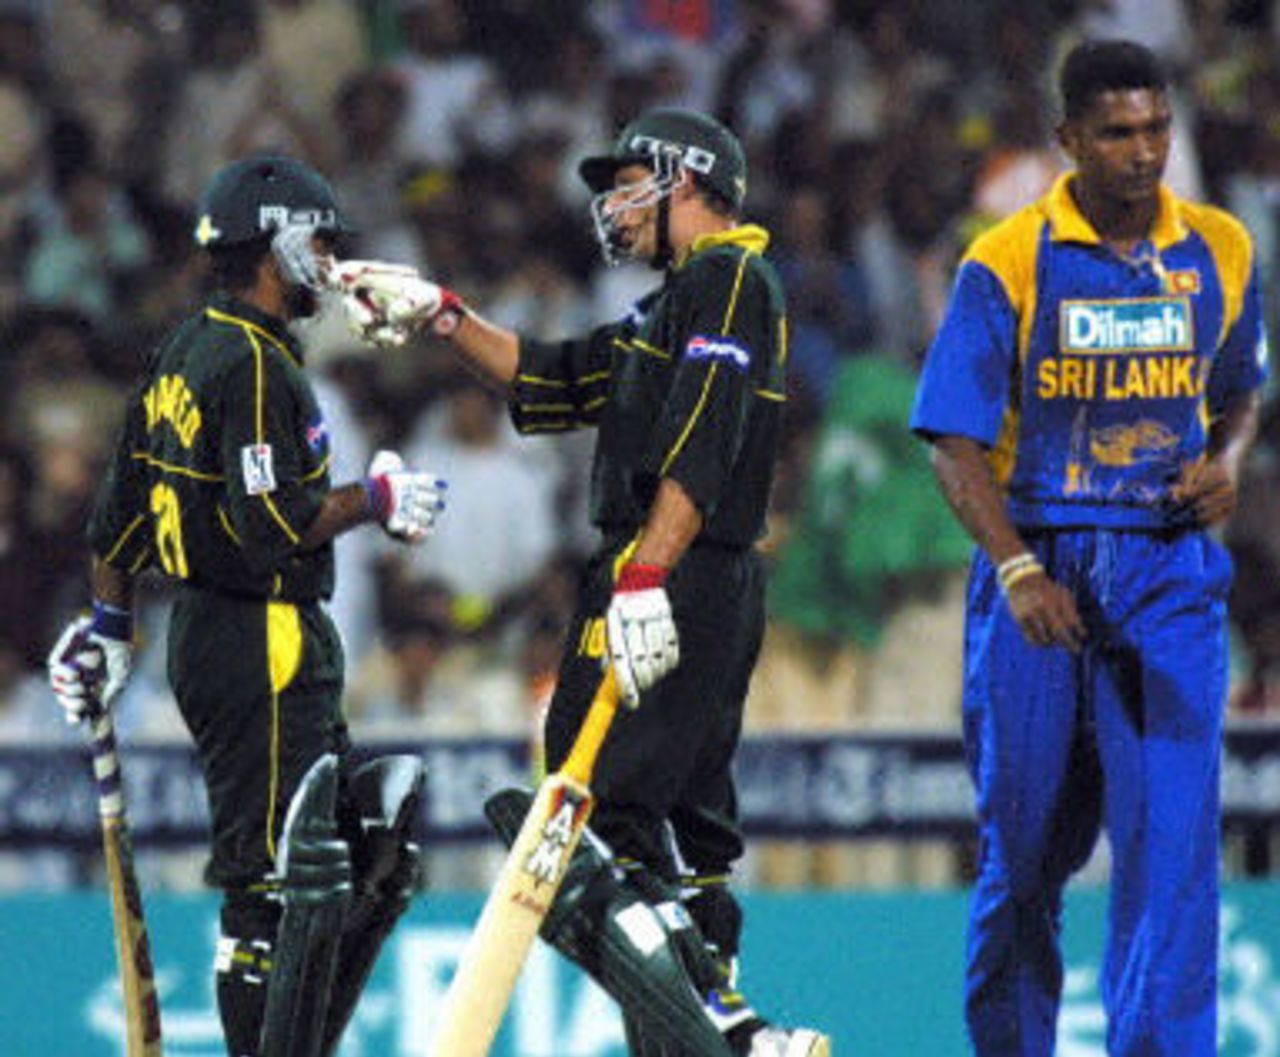 Pakistanis Shahid Afridi and Naved Latif congratulate each other during a cricket match against Sri Lanka in the Three Nation Champion Trophy in Sharjah 04 November